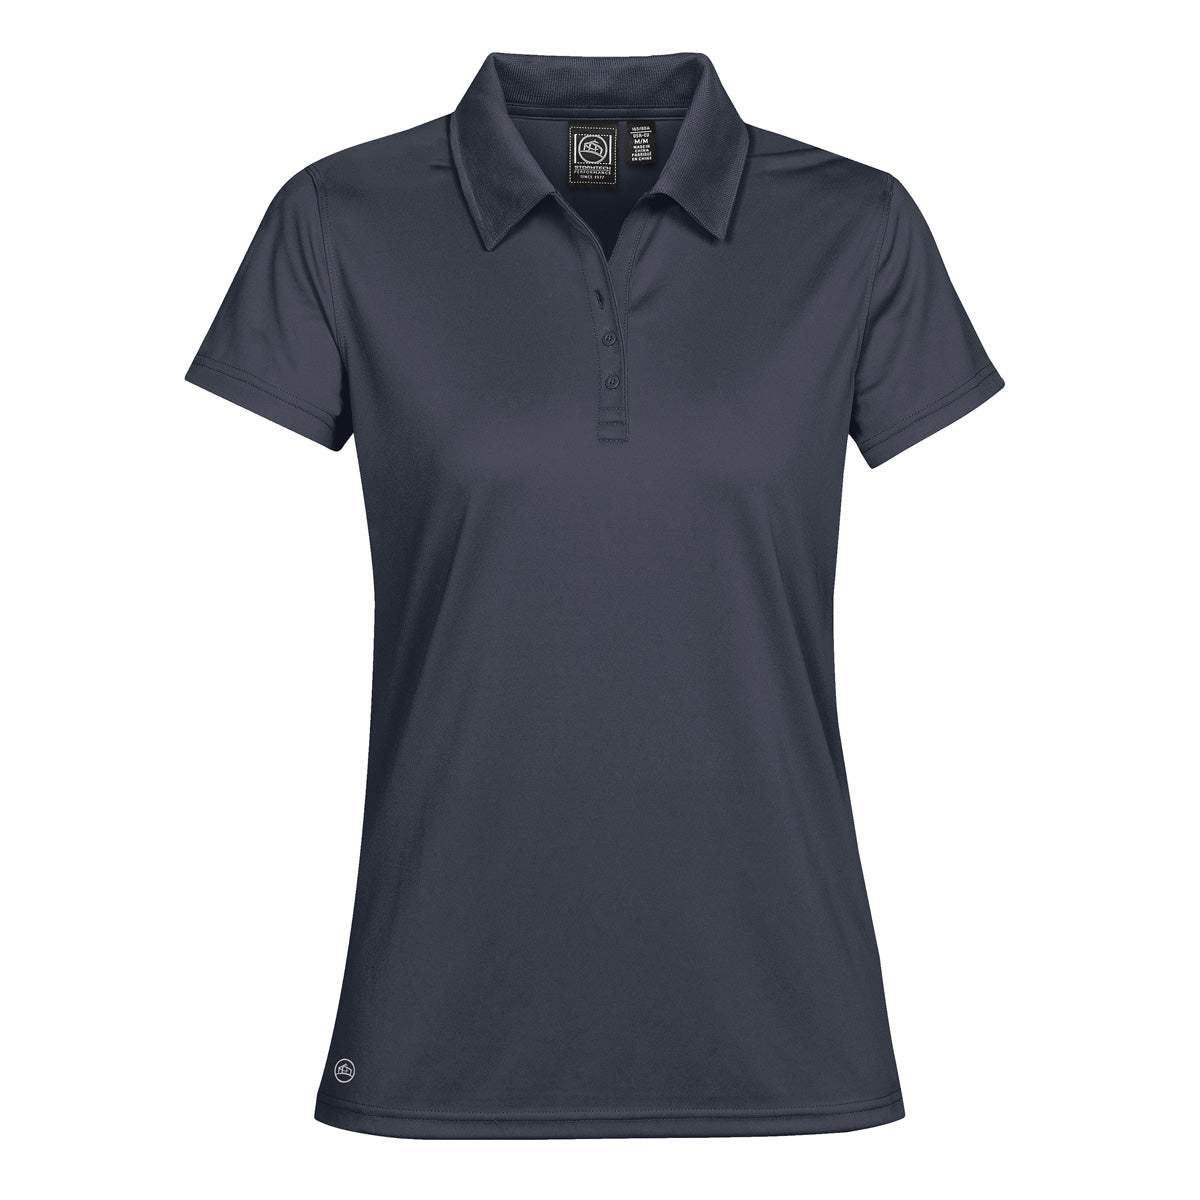 Women’s Eclipse H2X-DRY Pique Polo by Stormtech - Promotions Only Group Limited